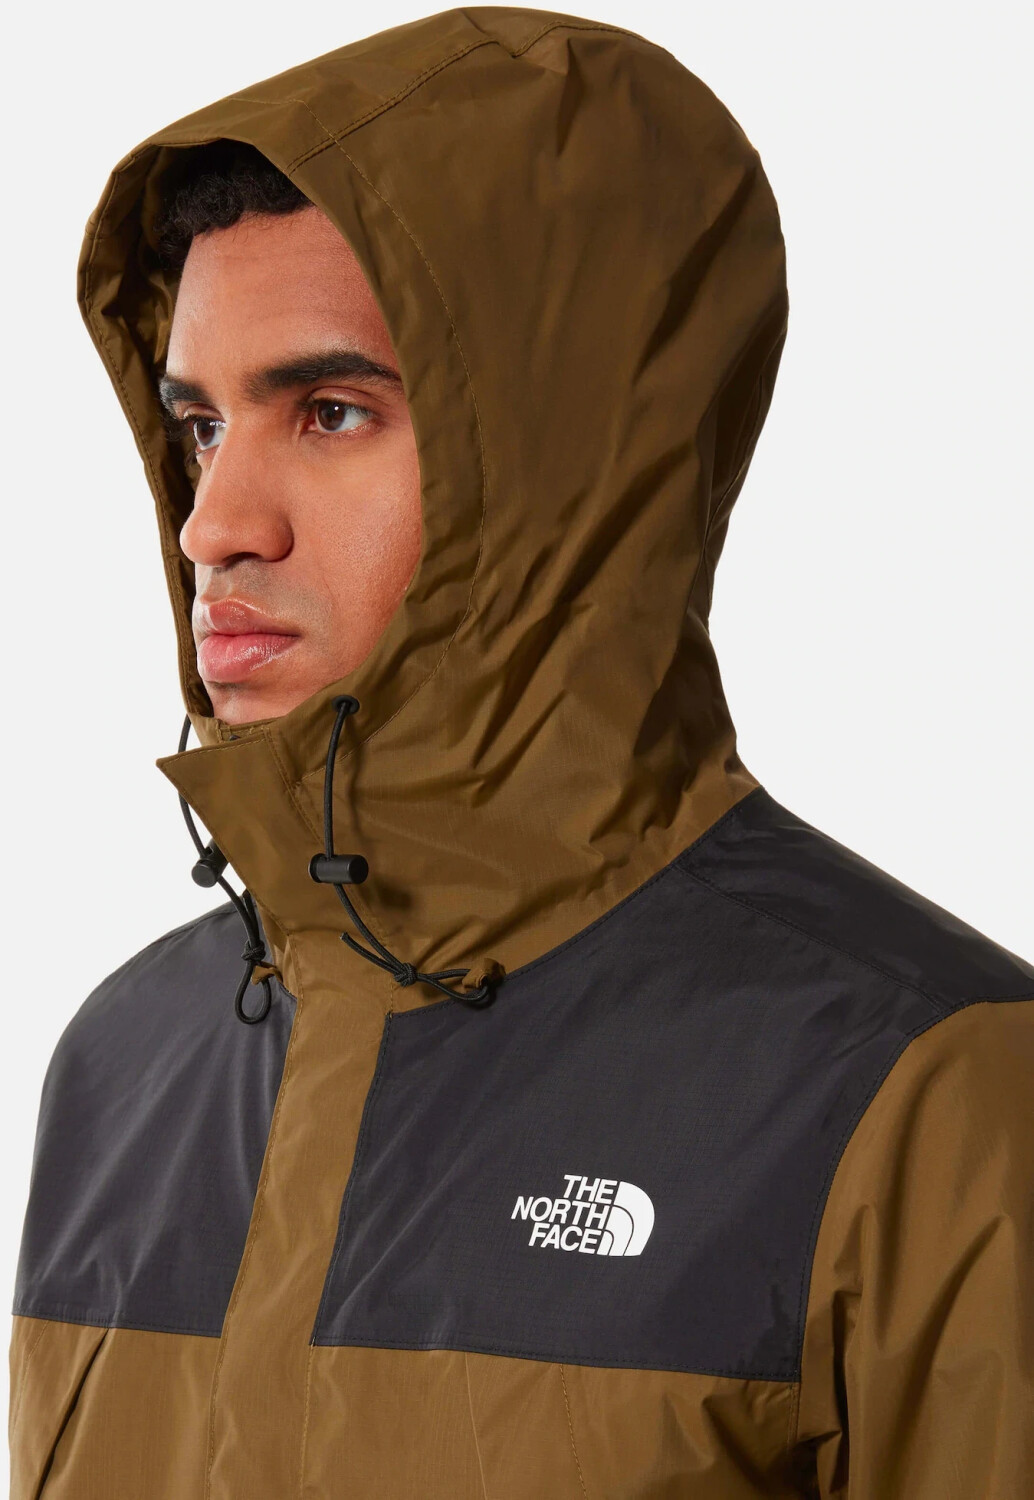 Buy The North Face Men's Antora Jacket military olive from £110.00 ...